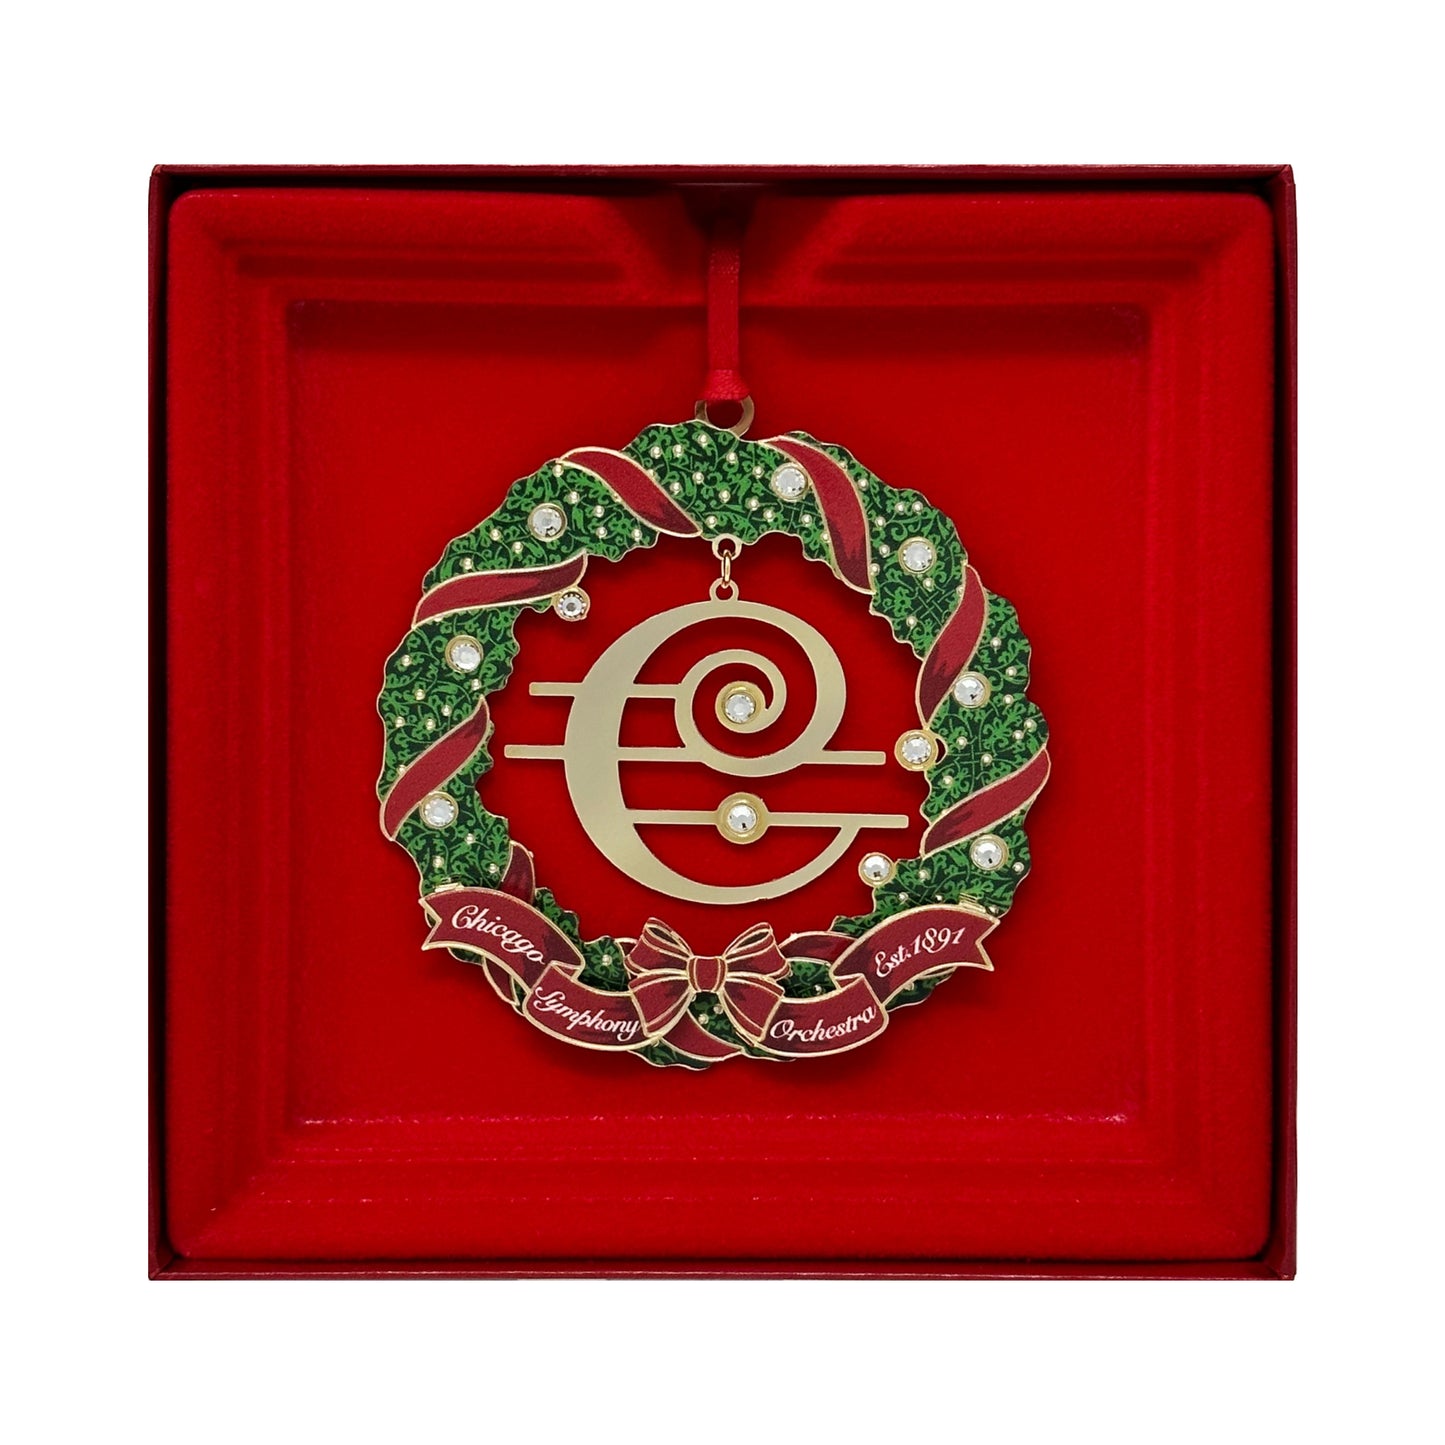 Chicago Symphony Orchestra Wreath Ornament